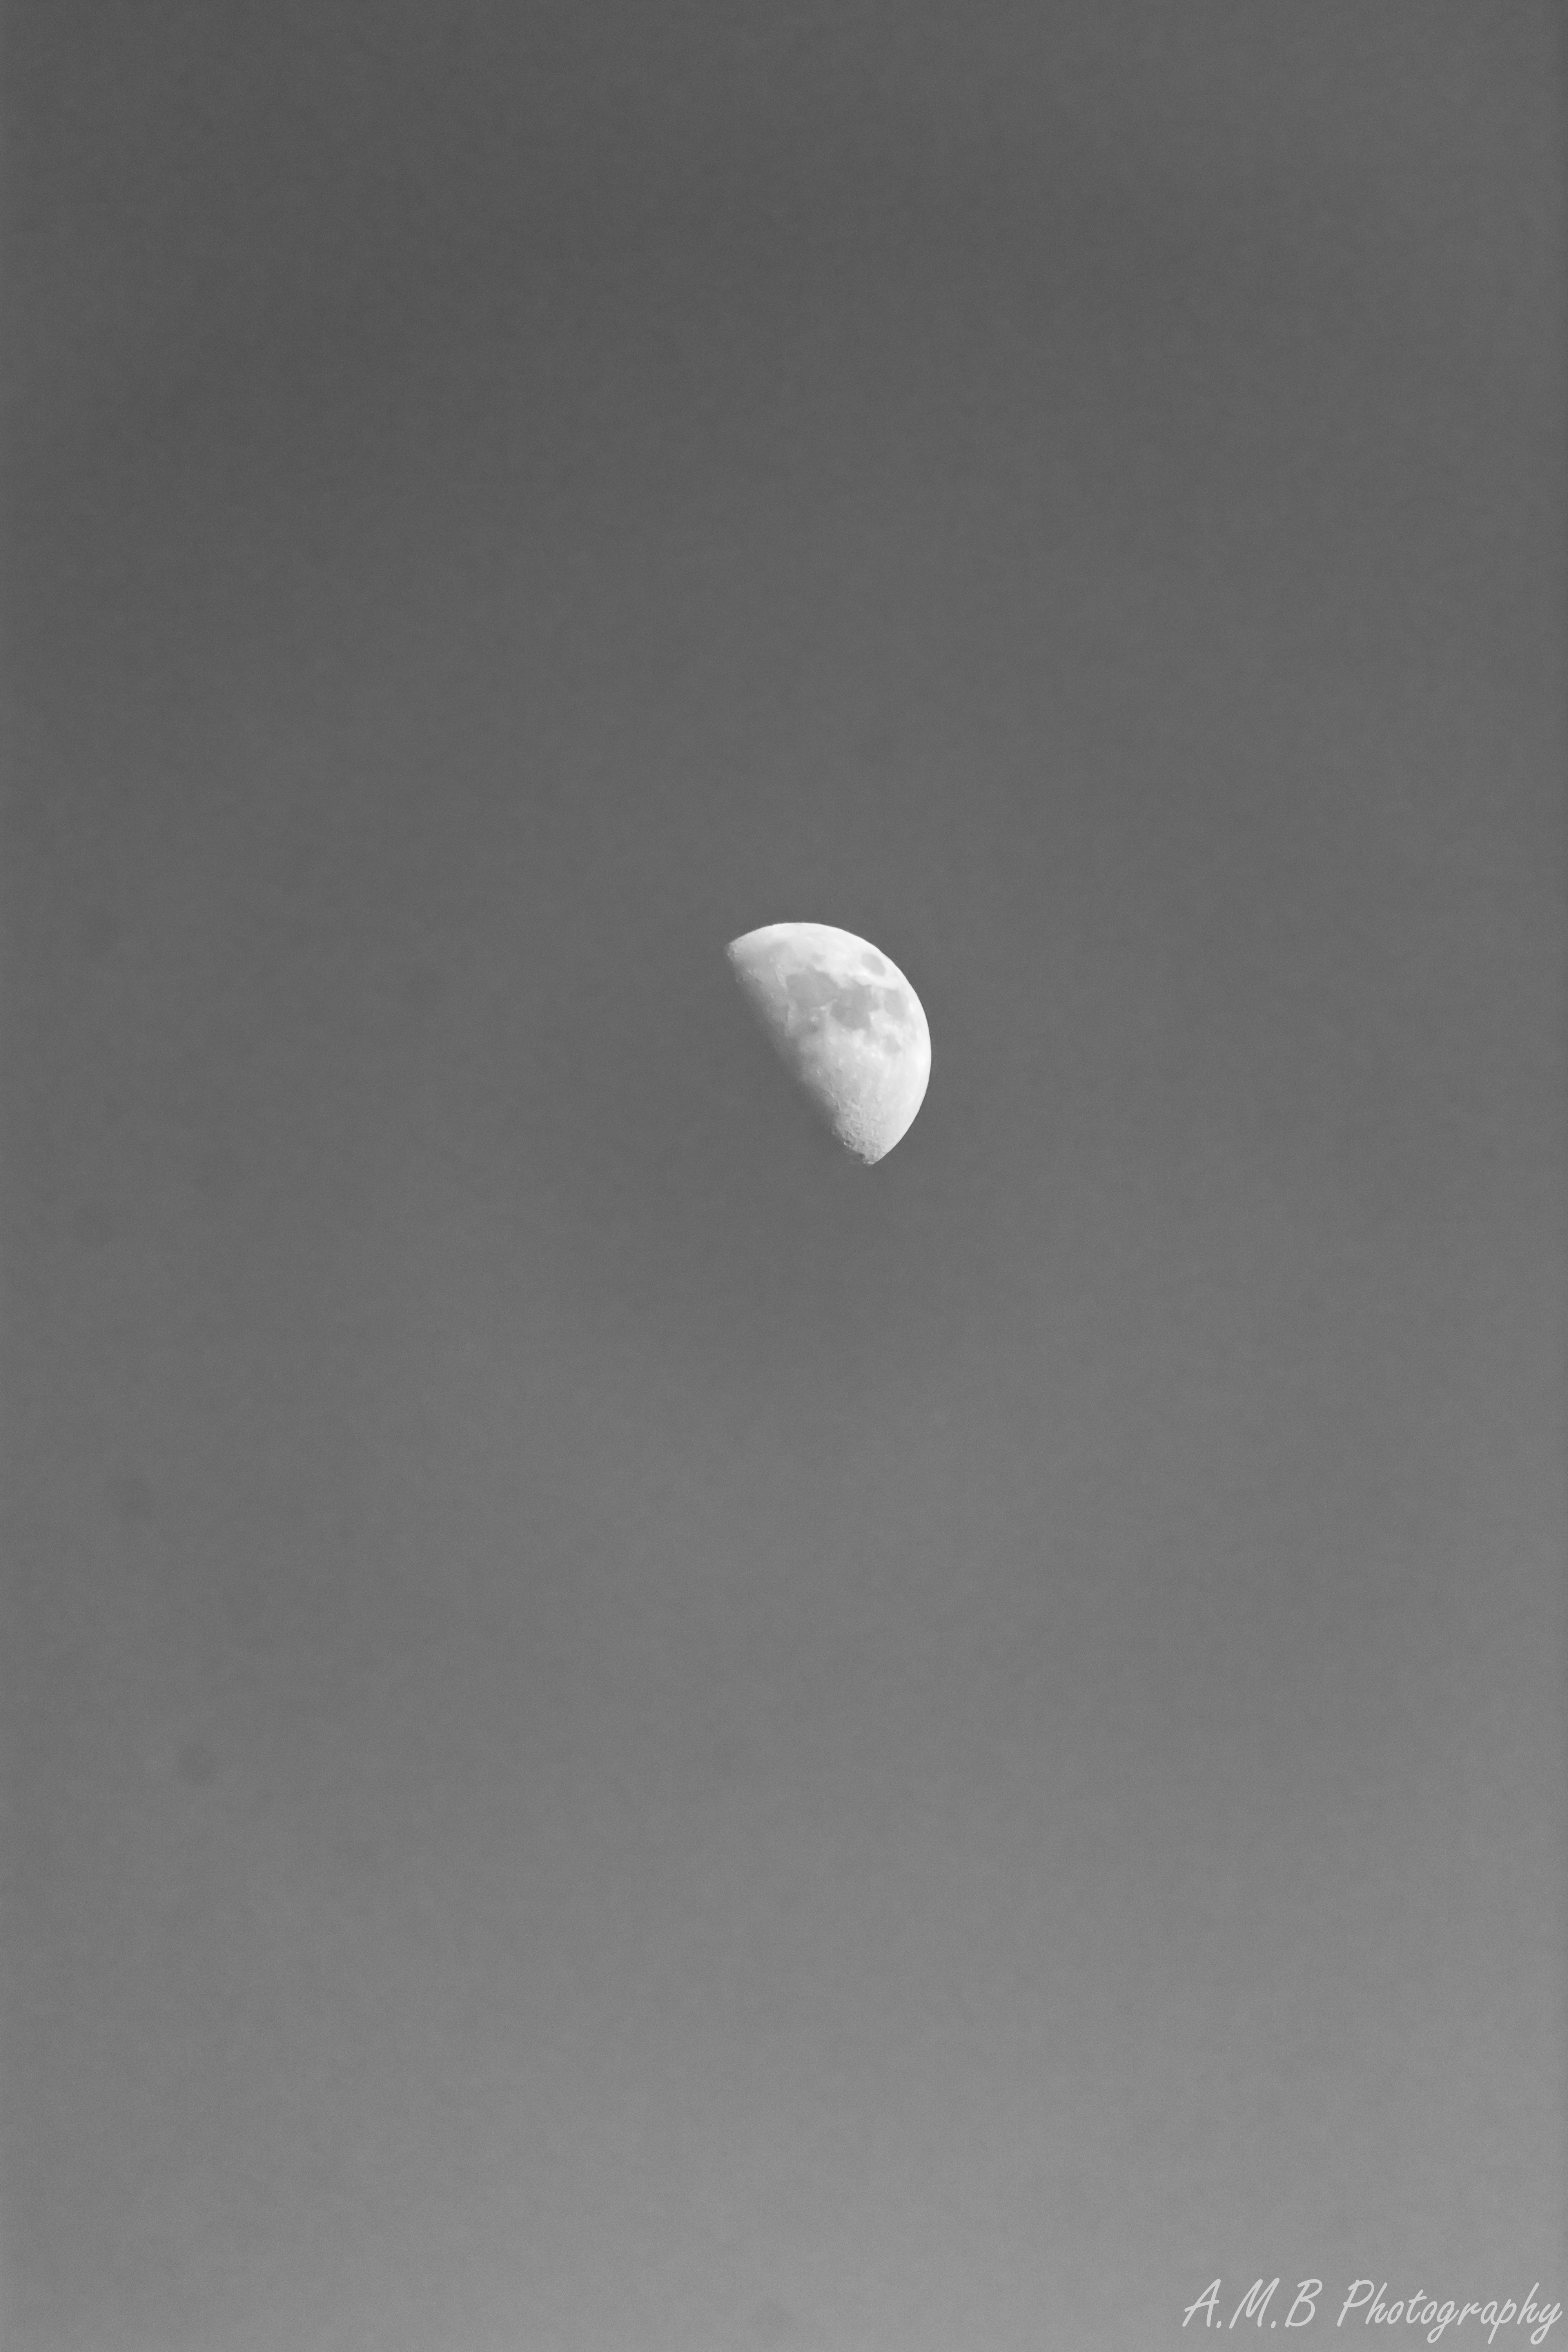 1st Quarter Moon in Black and White II